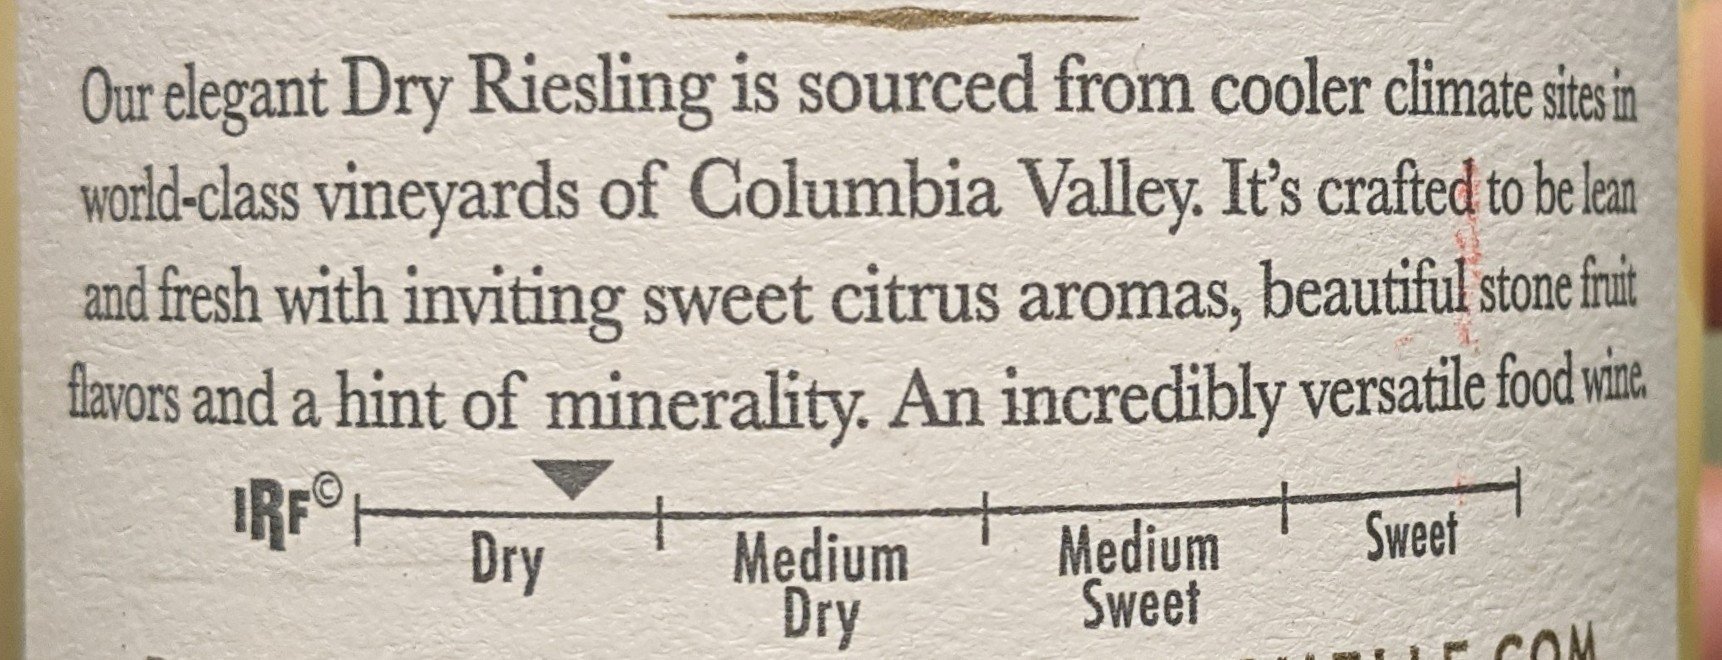 sweet white wines - riesling dryness scale